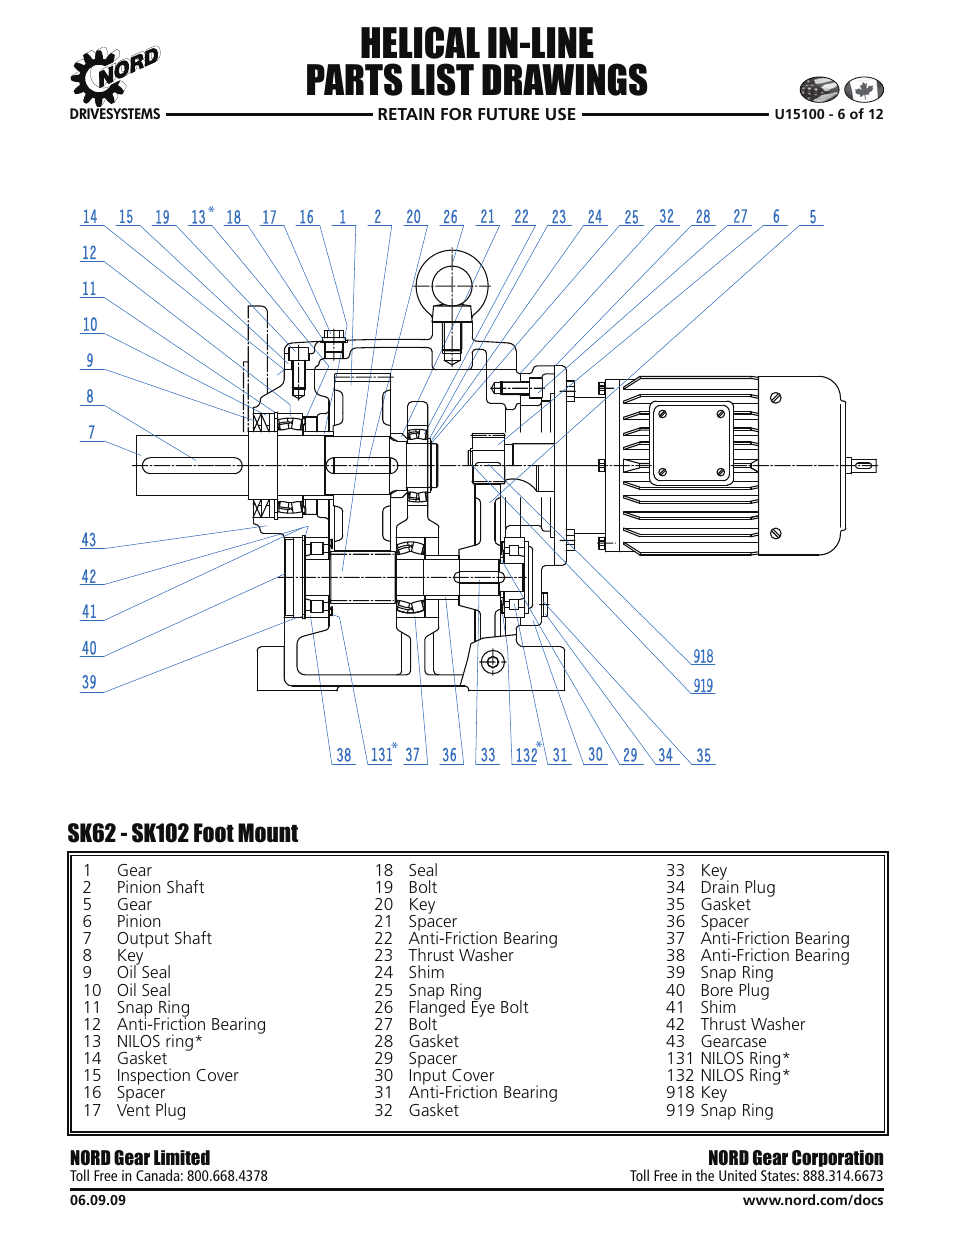 Helical in-line parts list drawings | Viking Pump NORD TSM For Helical